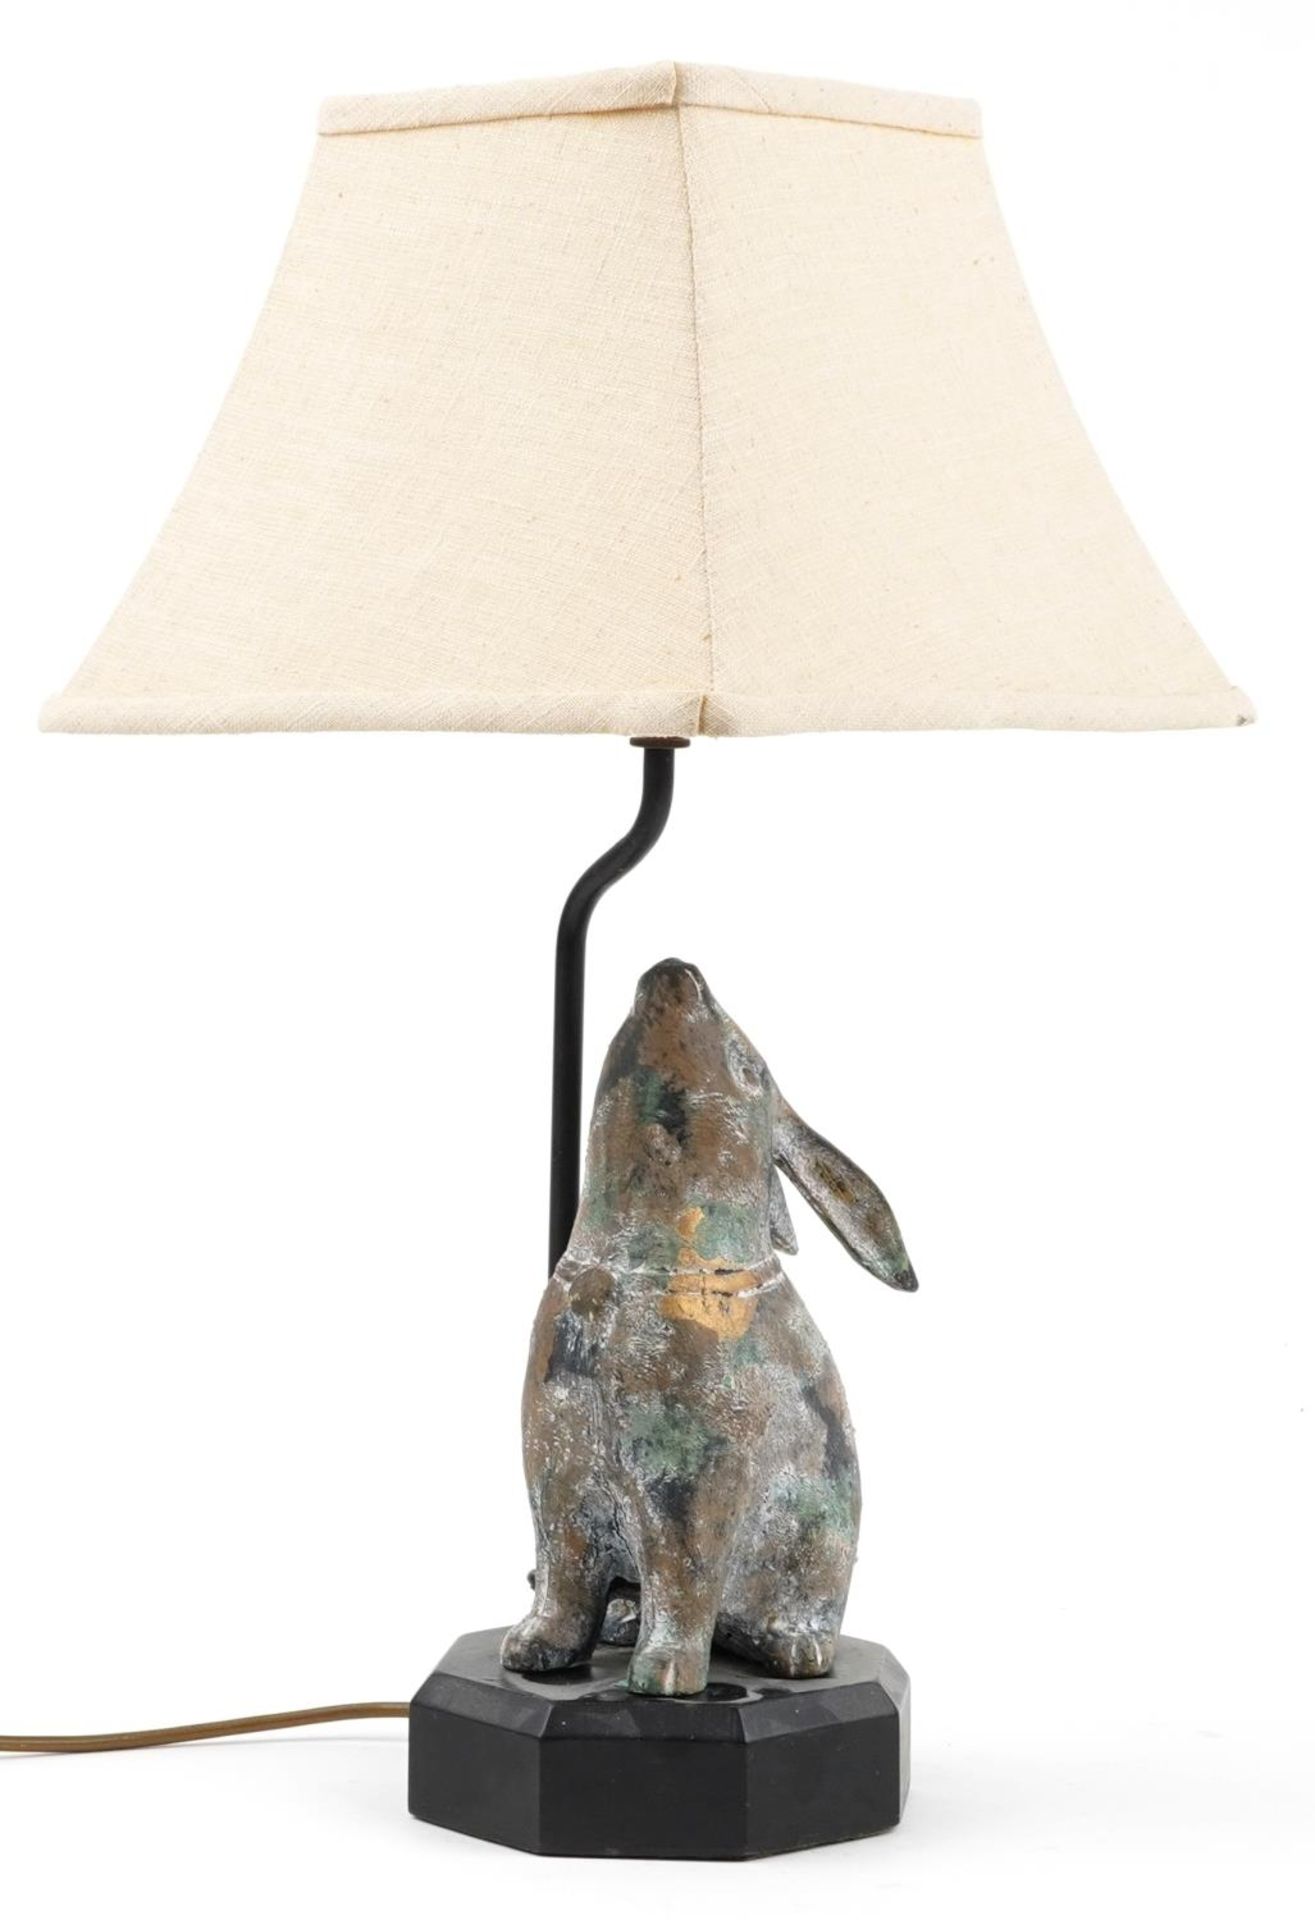 Chinese table ebonised table lamp with shade surmounted with a verdigris partially gilt bronzed